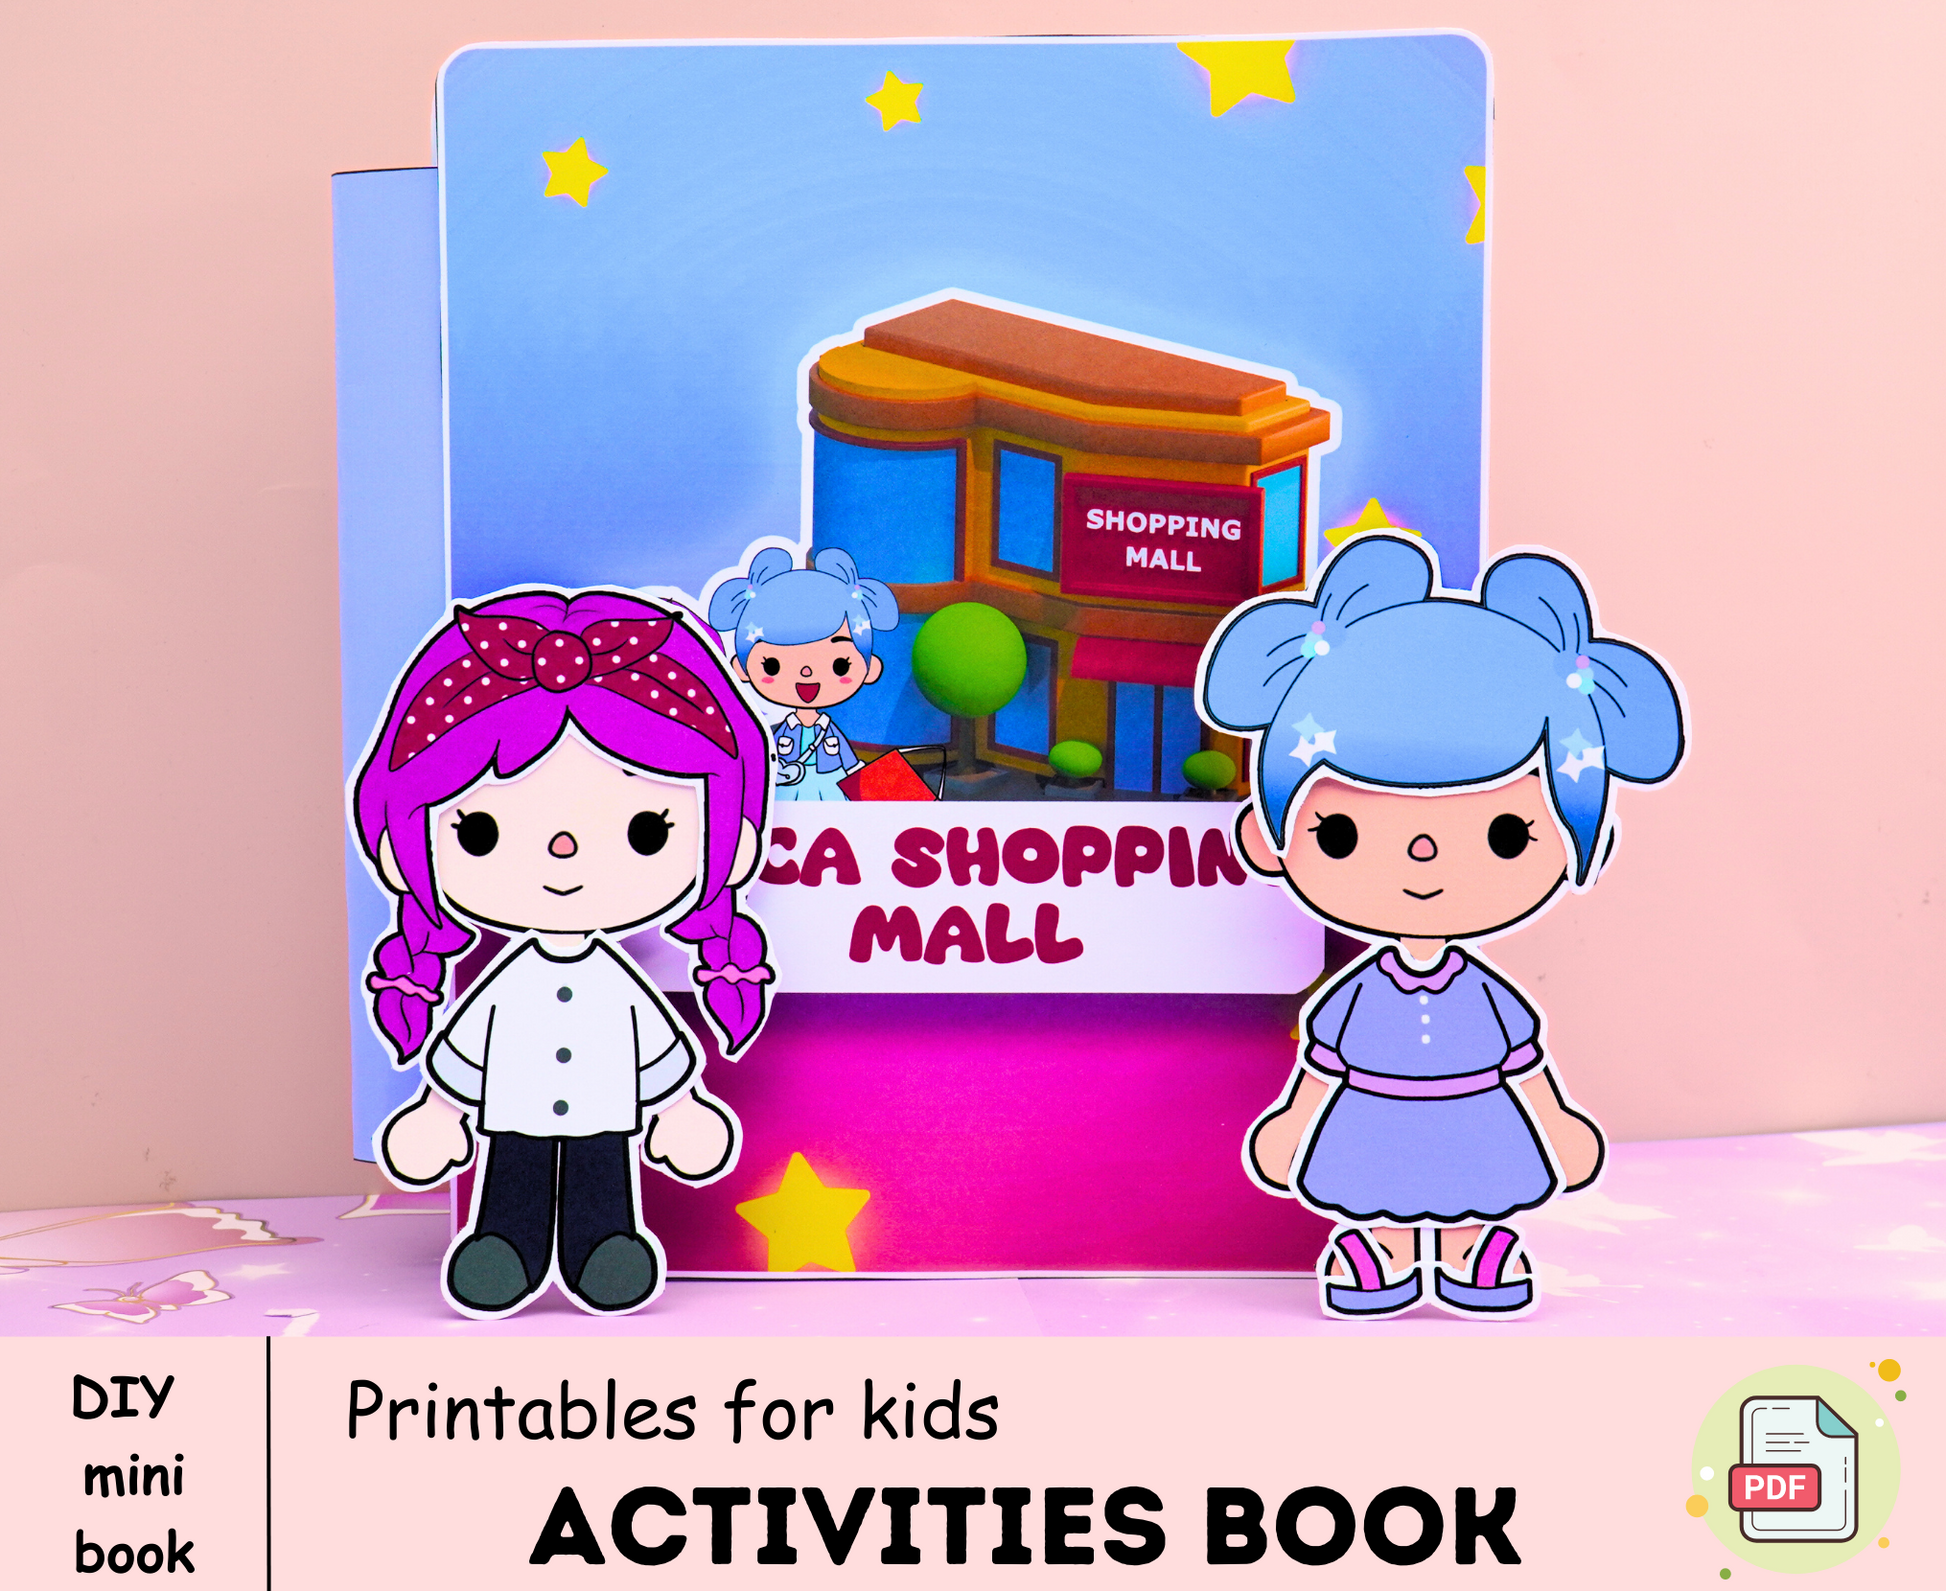 Shop Toca Boca Paper Doll School with great discounts and prices